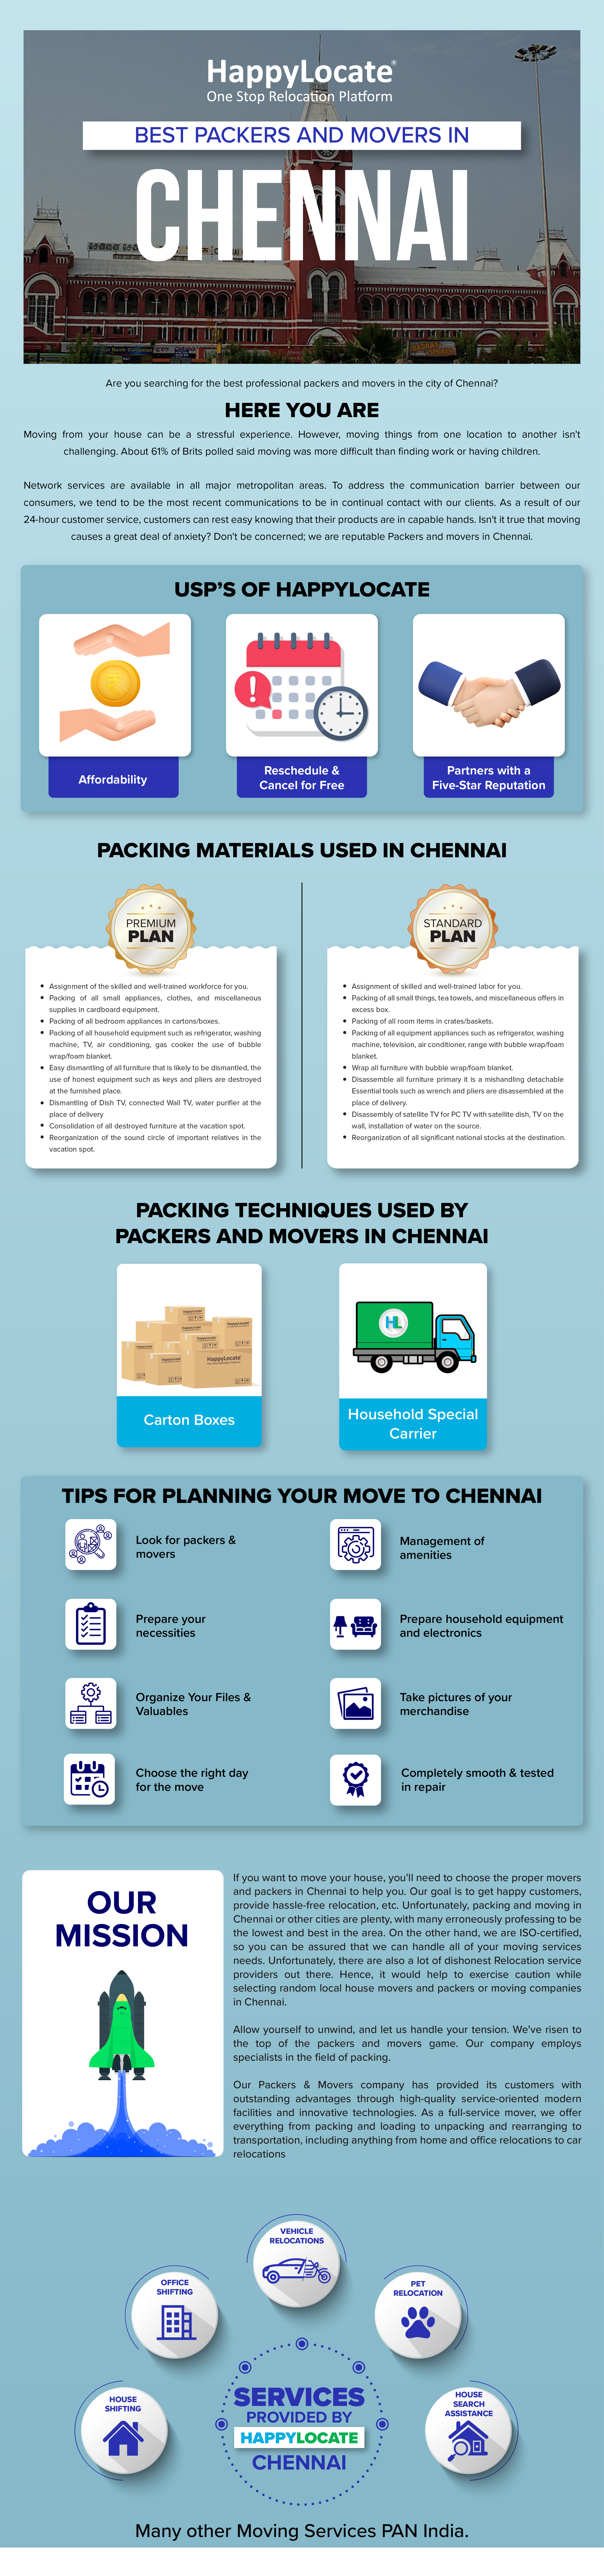 HappylLocate

One Stop Relocation Platform
f | TN

BEST PACKERS MOVERS IN |

 

Are you searching for the best professional packers and movers in the city of Chennai?

HERE YOU ARE

Moving from your house can be a stressful experience. However, moving things from one location to another isn't

challenging. About 61% of Brits polled said moving was more difficult than finding work or having children.

Network services are available in all major metropolitan areas. To address the communication barrier between our
consumers, we tend to be the most recent communications to be in continual contact with our clients. As a result of our
24-hour customer service, customers can rest easy knowing that their products are in capable hands. Isn't it true that moving

causes a great deal of anxiety? Don't be concerned; we are reputable Packers and movers in Chennai.

USP’S OF HAPPYLOCATE

Reschedule &
Cancel for Free

Partners with a
Five-Star Reputation

Affordability

 

PACKING MATERIALS USED IN CHENNAI

STN

Pr RX

pe.
’ y — 4
PREMIUM ¢ STANDARD
. \{ /

7

) ~~ 4
® Assignment of the skilled and well-trained workforce for you. ® Assignment of skilled and well-trained labor for you.

Packing of all small appliances, clothes, and miscellaneous
supplies in cardboard equipment.

Packing of all bedroom appliances in cartons/boxes.

Packing of all household equipment such as refrigerator, washing
machine, TV, air conditioning, gas cooker the use of bubble
wrap/foam blanket.

Easy dismantling of all furniture that is likely to be dismantled, the
use of honest equipment such as keys and pliers are destroyed
at the furnished place.

Dismantling of Dish TV, connected Wall TV, water purifier at the
place of delivery

Consolidation of all destroyed furniture at the vacation spot.
Reorganization of the sound circle of important relatives in the

Packing of all small things, tea towels, and miscellaneous offers in
excess box.

Packing of all room items in crates/baskets.

Packing of all equipment appliances such as refrigerator, washing
machine, television, air conditioner, range with bubble wrap/foam
blanket.

Wrap all furniture with bubble wrap/foam blanket.

Disassemble all furniture primary it is a mishandling detachable
Essential tools such as wrench and pliers are disassembled at the

place of delivery.

® Disassembly of satellite TV for PC TV with satellite dish, TV on the

wall, installation of water on the source.

® Reorganization of all significant national stocks at the destination.

vacation spot.

  

PACKING TECHNIQUES USED BY
PACKERS AND MOVERS IN CHENNAI

 

Happytoct

mbes
Happylocate
Happoce der td are
Happytorate N
mE gre OEE
Happytoate Happylocate

we -

! mre oT

Household Special
Carrier

(0: 1g lo] l= 1) (CS

 

TIPS FOR PLANNING YOUR MOVE TO CHENNAI

Look for packers &
movers

Management of
amenities

Prepare your
necessities

Prepare household equipment
and electronics

 

Take pictures of your
merchandise

Organize Your Files & P=
Valuables aa)

Choose the right day
for the move

Completely smooth & tested
in repair

&y,
»

 

If you want to move your house, you'll need to choose the proper movers
and packers in Chennai to help you. Our goal is to get happy customers,
provide hassle-free relocation, etc. Unfortunately, packing and moving in
Chennai or other cities are plenty, with many erroneously professing to be
the lowest and best in the area. On the other hand, we are ISO-certified,
so you can be assured that we can handle all of your moving services
needs. Unfortunately, there are also a lot of dishonest Relocation service
providers out there. Hence, it would help to exercise caution while
selecting random local house movers and packers or moving companies
in Chennai.

OUR
MISSION

Allow yourself to unwind, and let us handle your tension. We've risen to
the top of the packers and movers game. Our company employs
specialists in the field of packing.

Our Packers & Movers company has provided its customers with
outstanding advantages through high-quality service-oriented modern
facilities and innovative technologies. As a full-service mover, we offer
everything from packing and loading to unpacking and rearranging to
transportation, including anything from home and office relocations to car
relocations

 

   
    

  

VEHICLE
RELOCATIONS

   
    
   
   

   

OFFICE
SHIFTING

    
 

PET
RELOCATION

a

 

 
   
 

. 5 HOUSE
House "SERVICES cea

SHIFTING . P R OVI D E D BY * ASSISTANCE

© HAPPYLOCATE | : A
-. CHENNAI

Many other Moving Services PAN India.